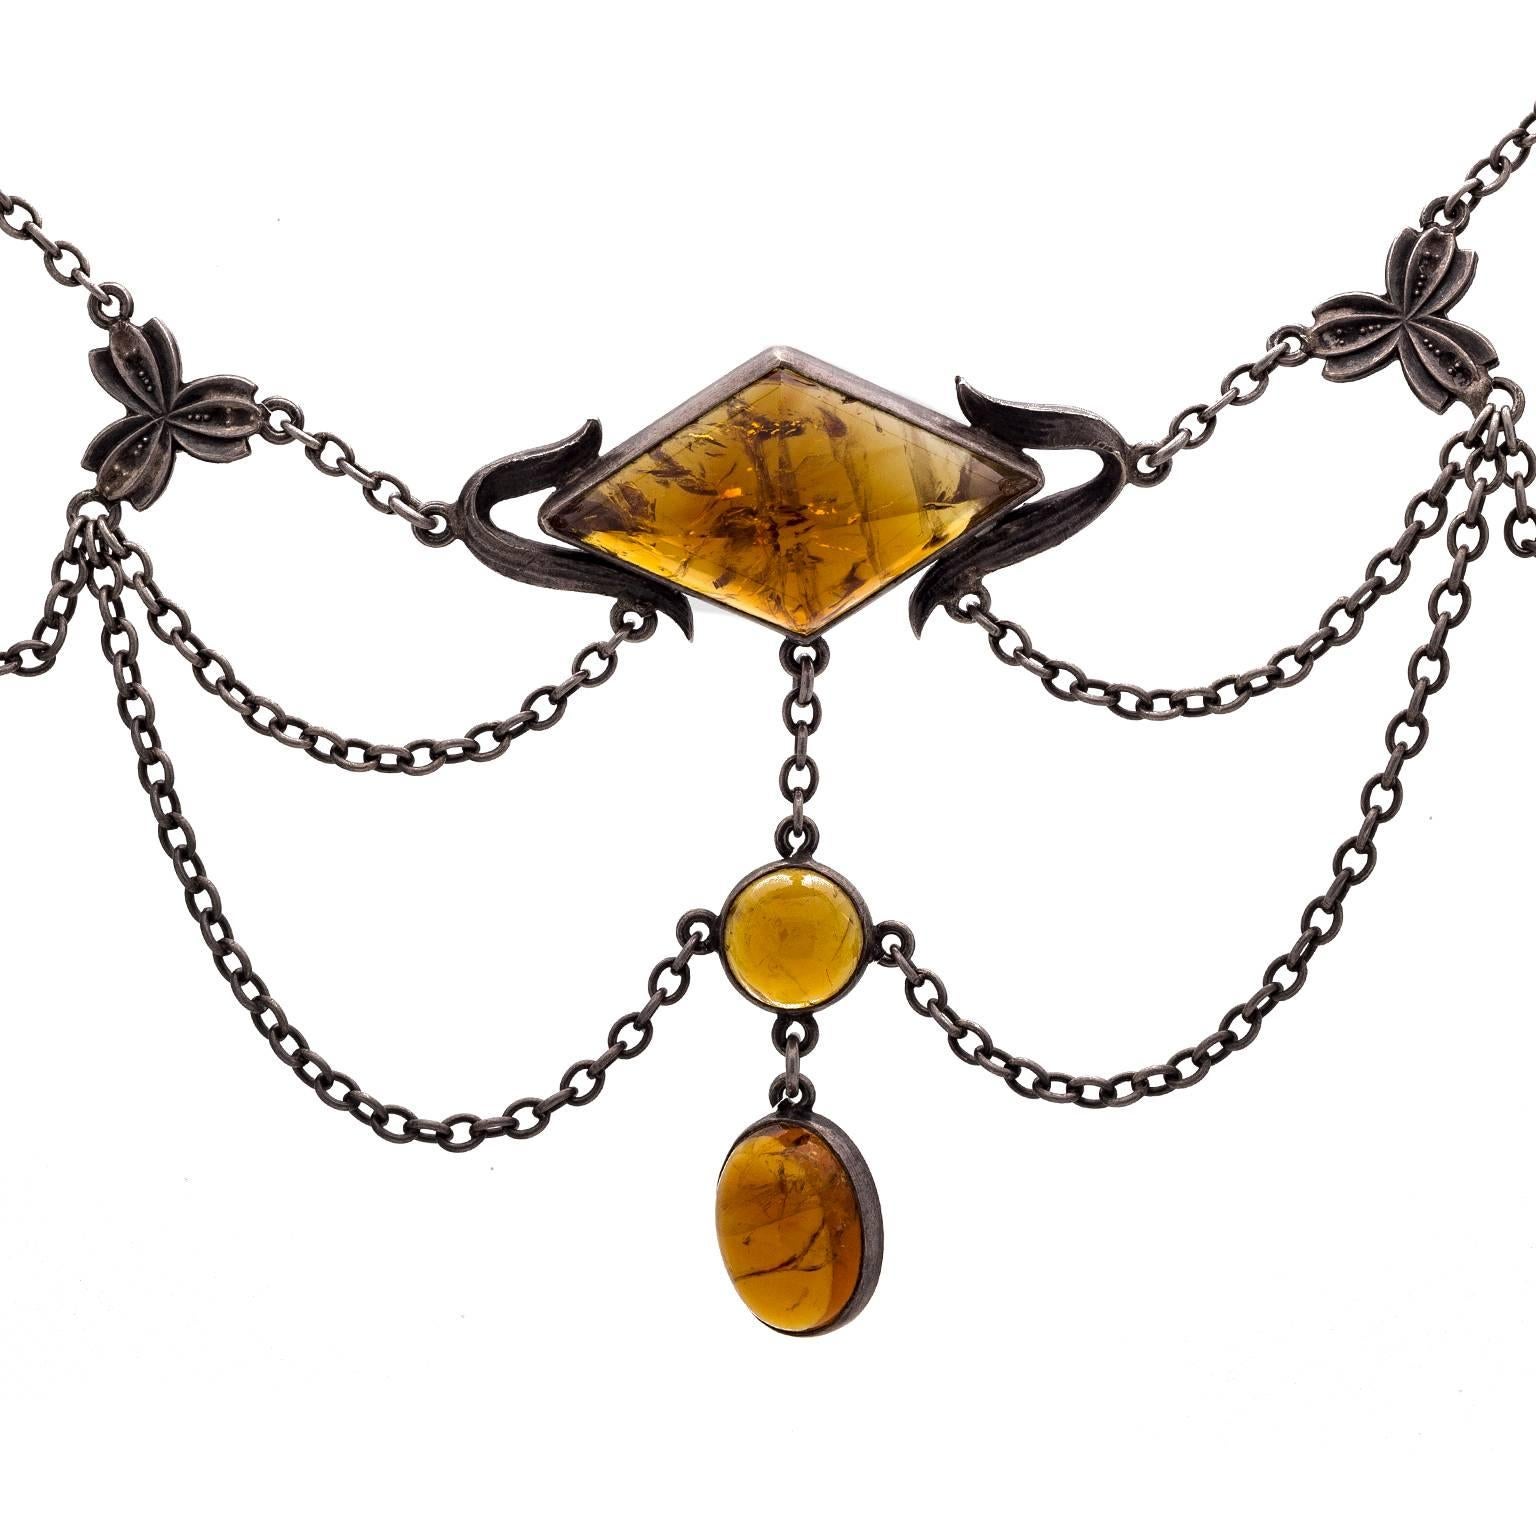 This citrine and oxidized sterling silver draped necklace is a study in amazing design. The citrine is beautifully cut to reflect the yummy rich color of these beautifully matched stones. The chain is handmade and very sturdy as well as light and